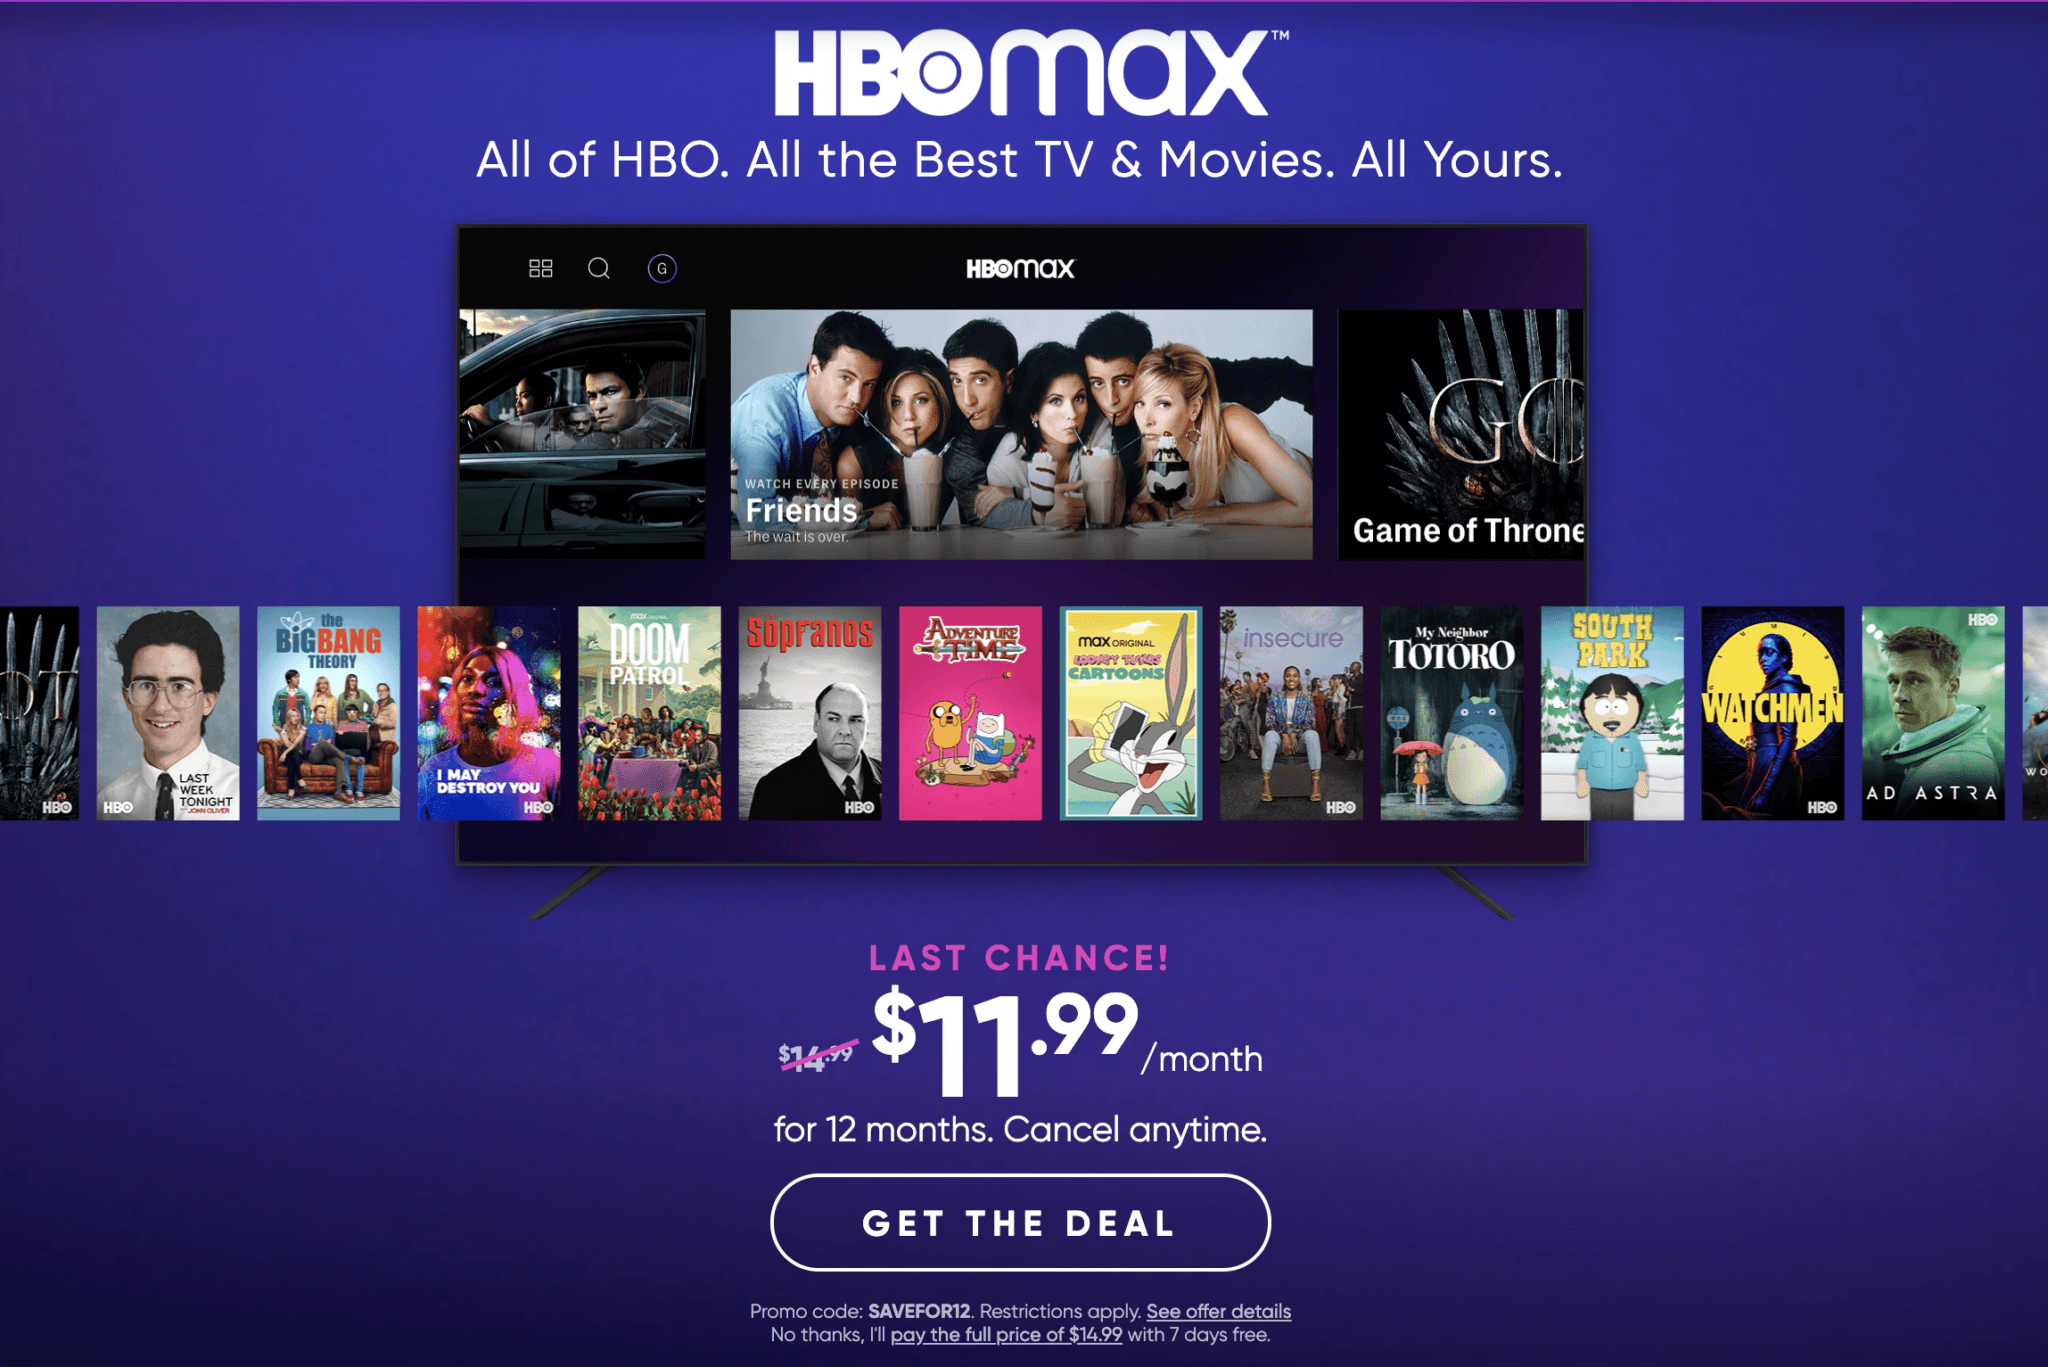 Last Chance Get 1 Year of HBO Max for a Special Discount with Code